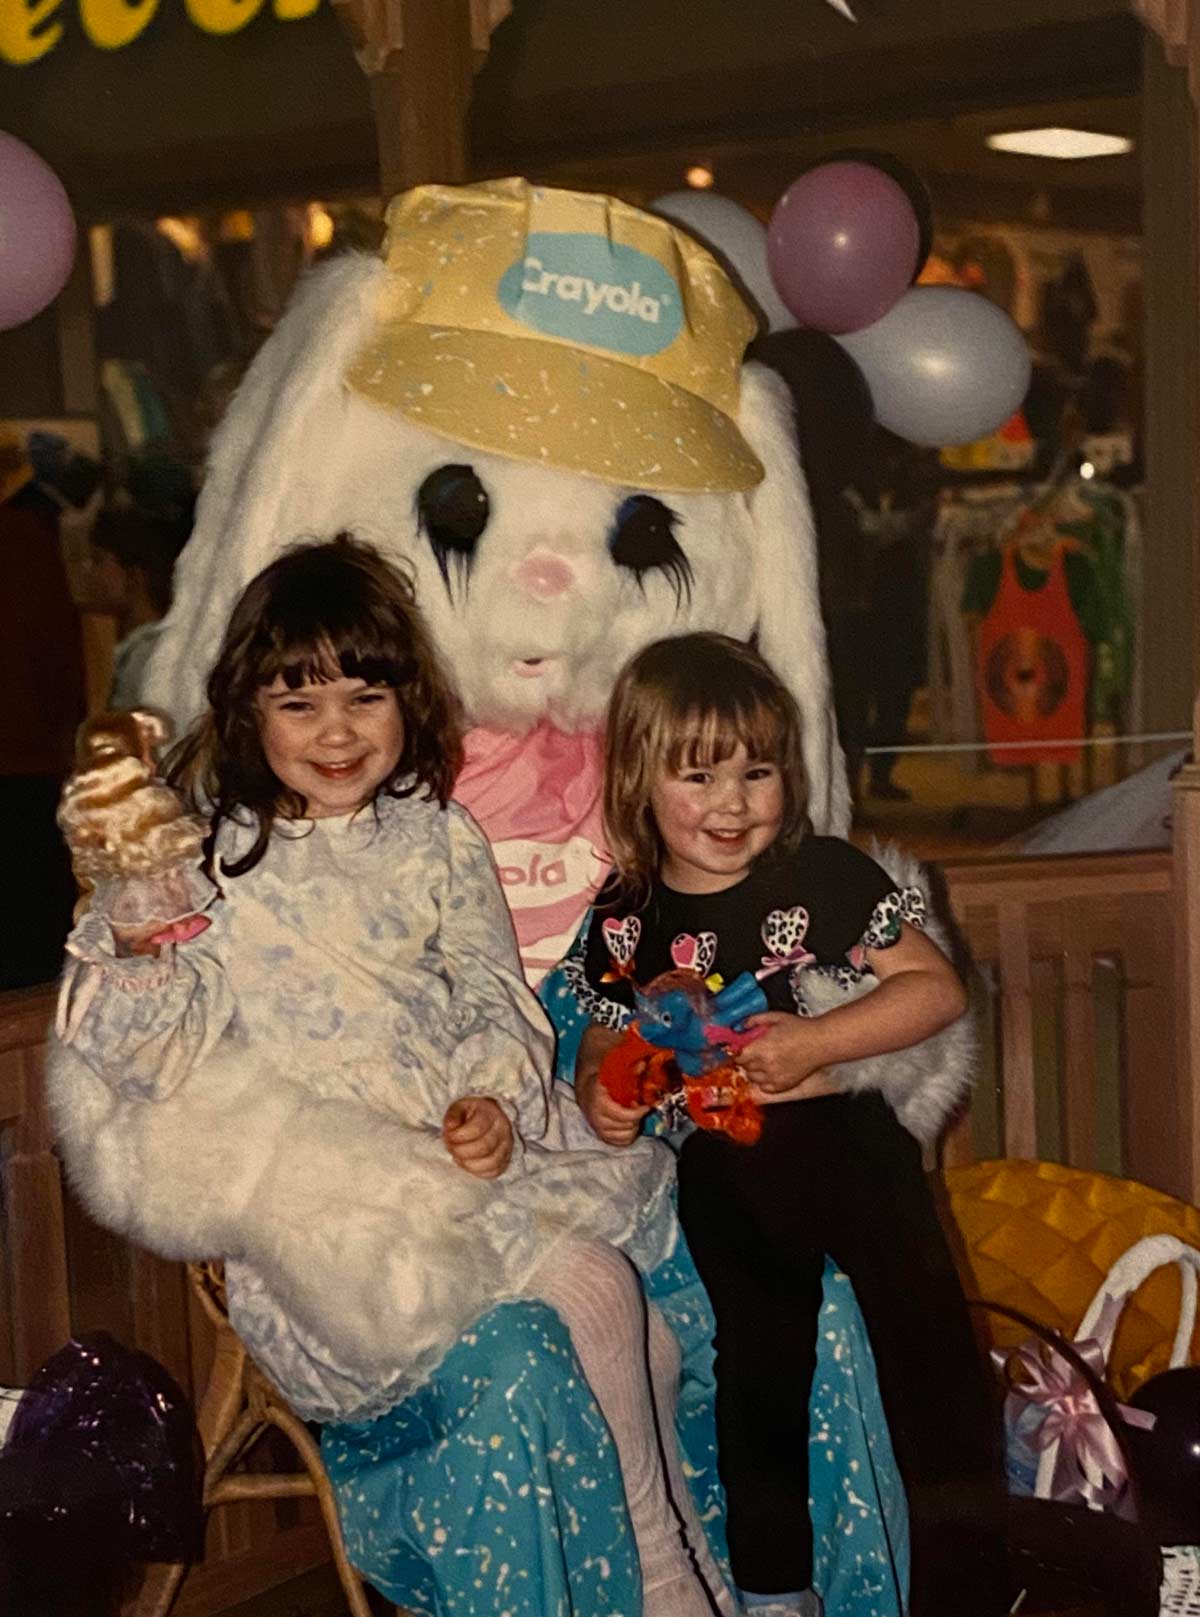 Clearly at that moment we didn’t realize the bunny was terrifying